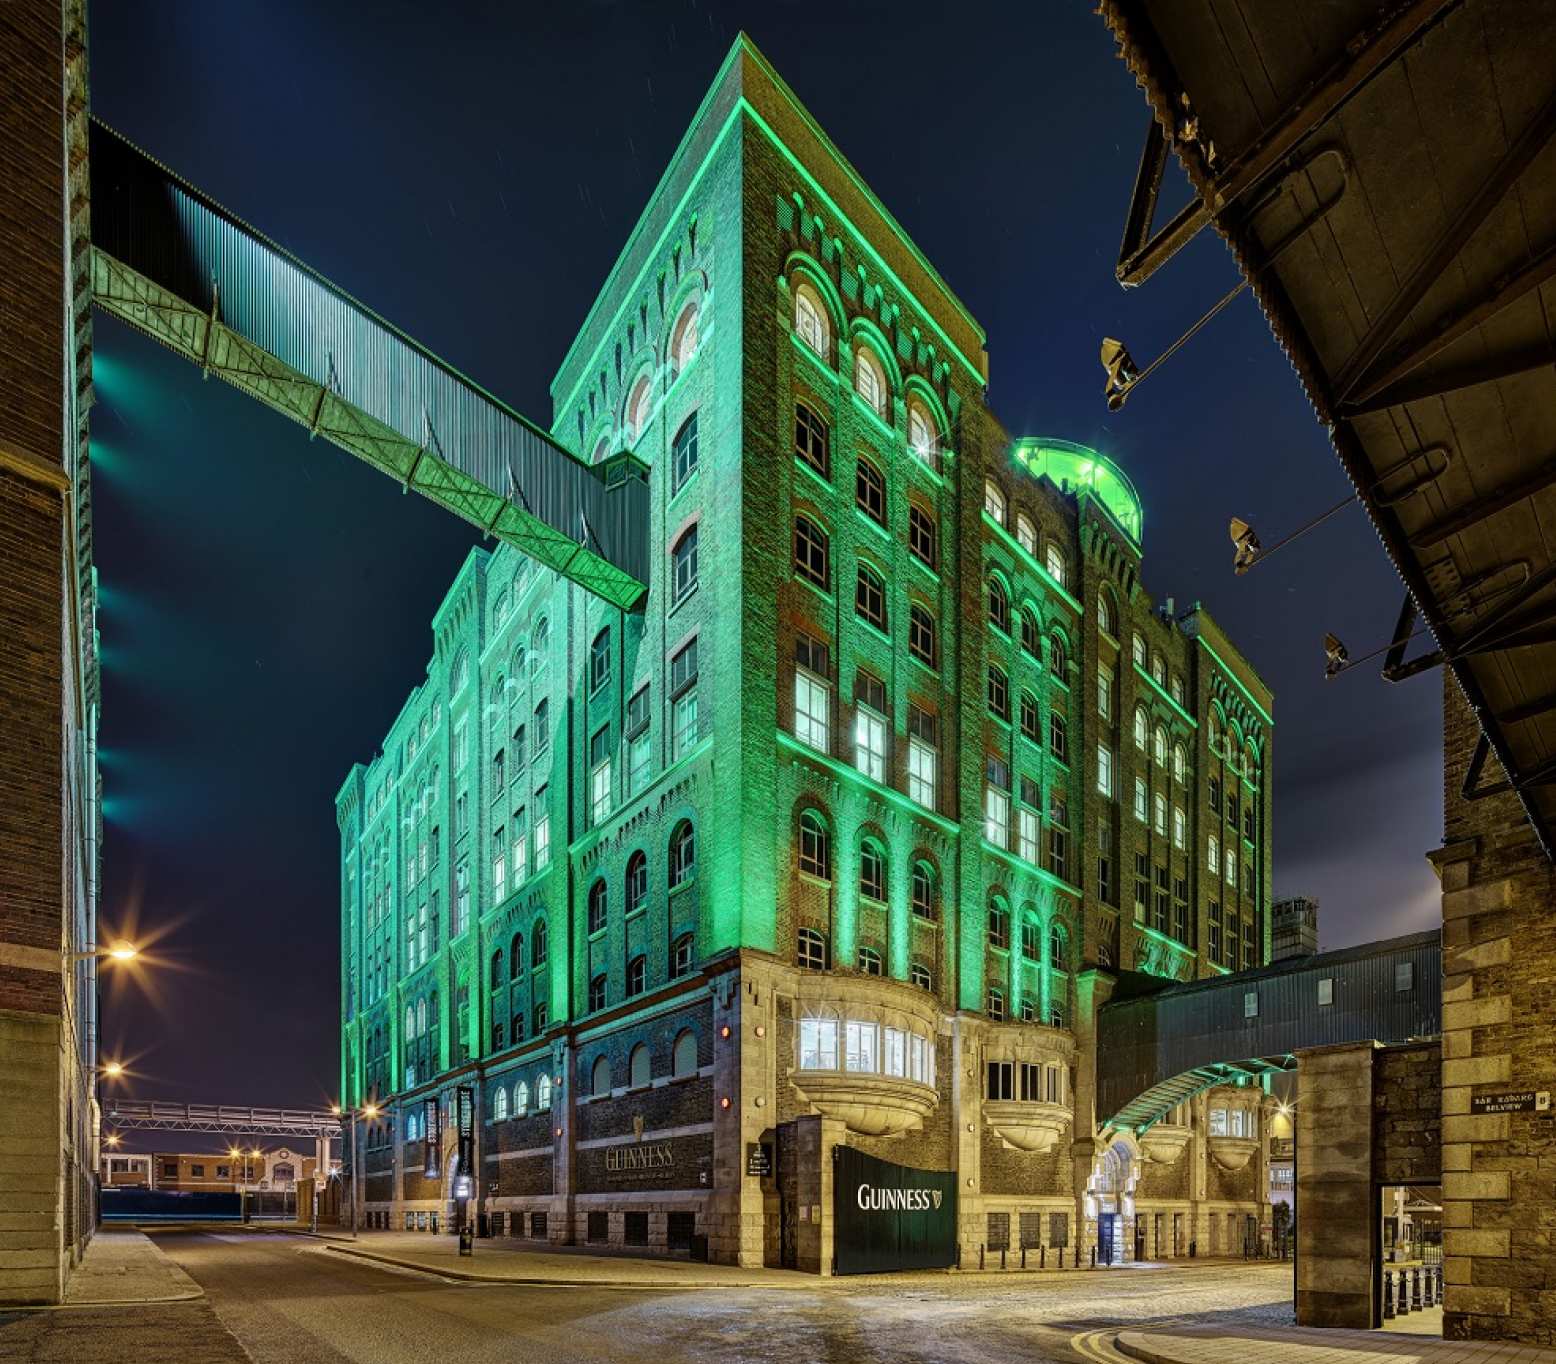 Outside view of Guinness Storehouse building with green lighting